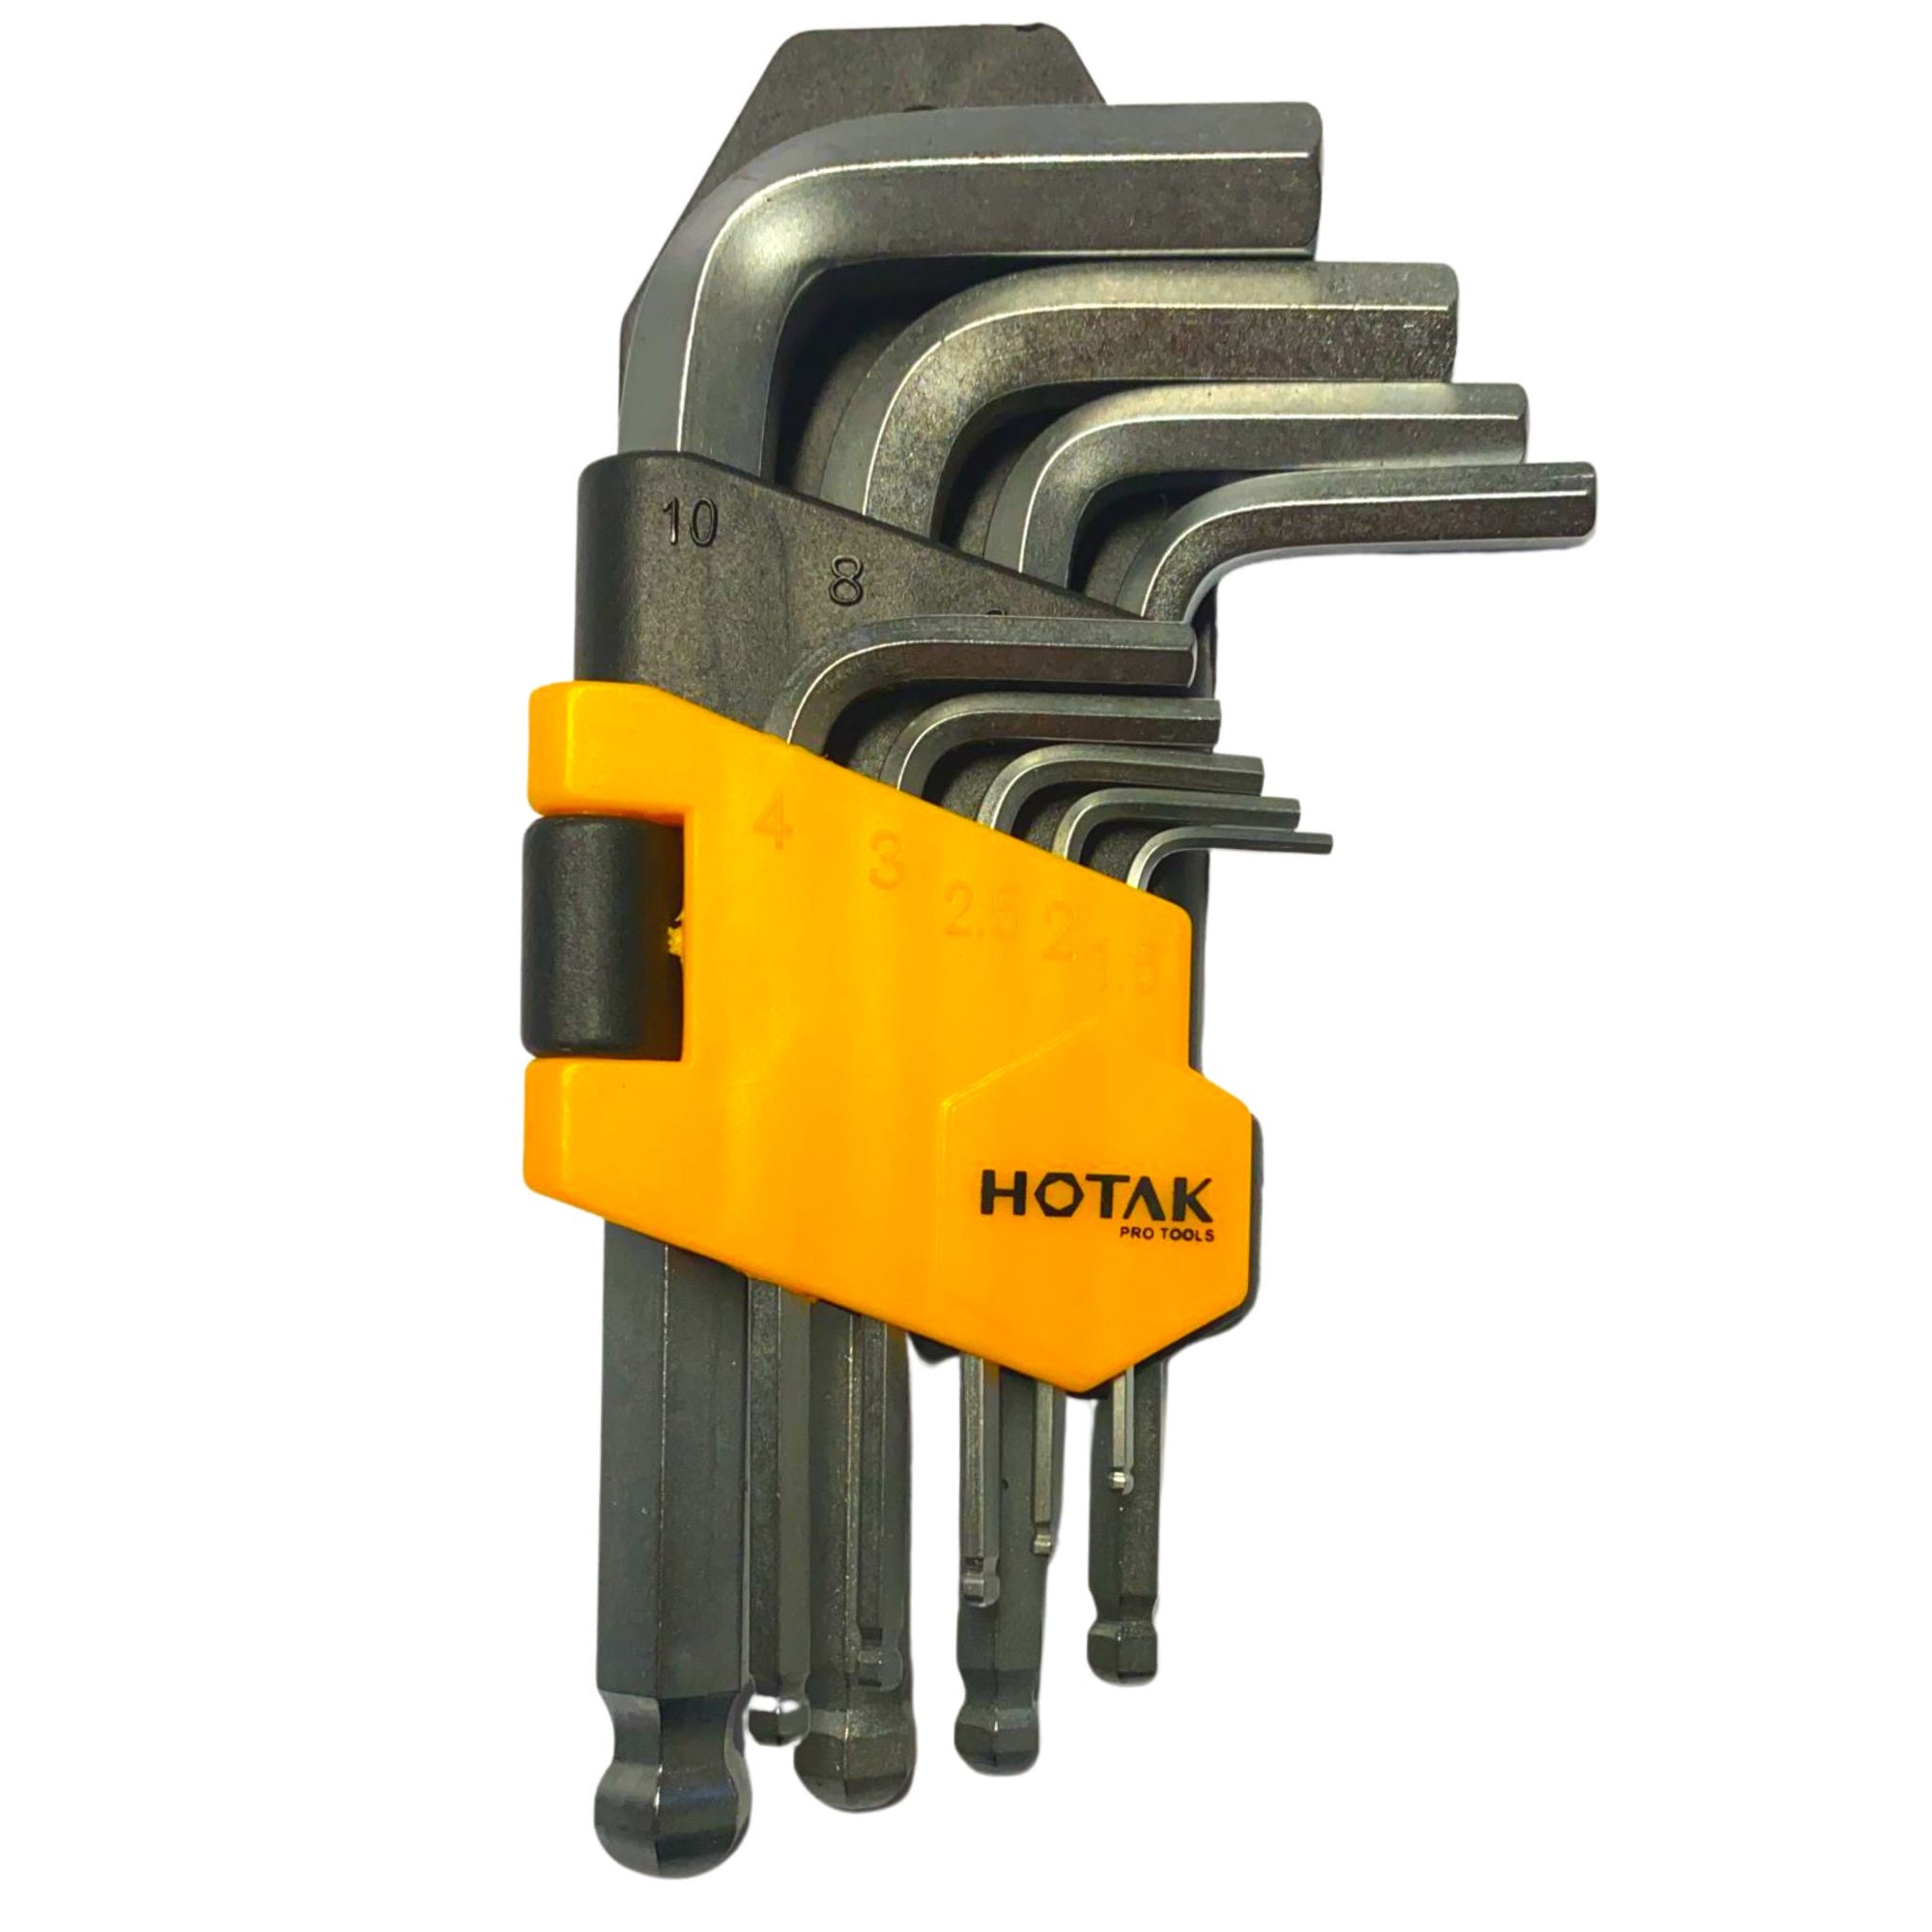 9 piece Short Arm Ball Point Hex Key Set - South East Clearance Centre